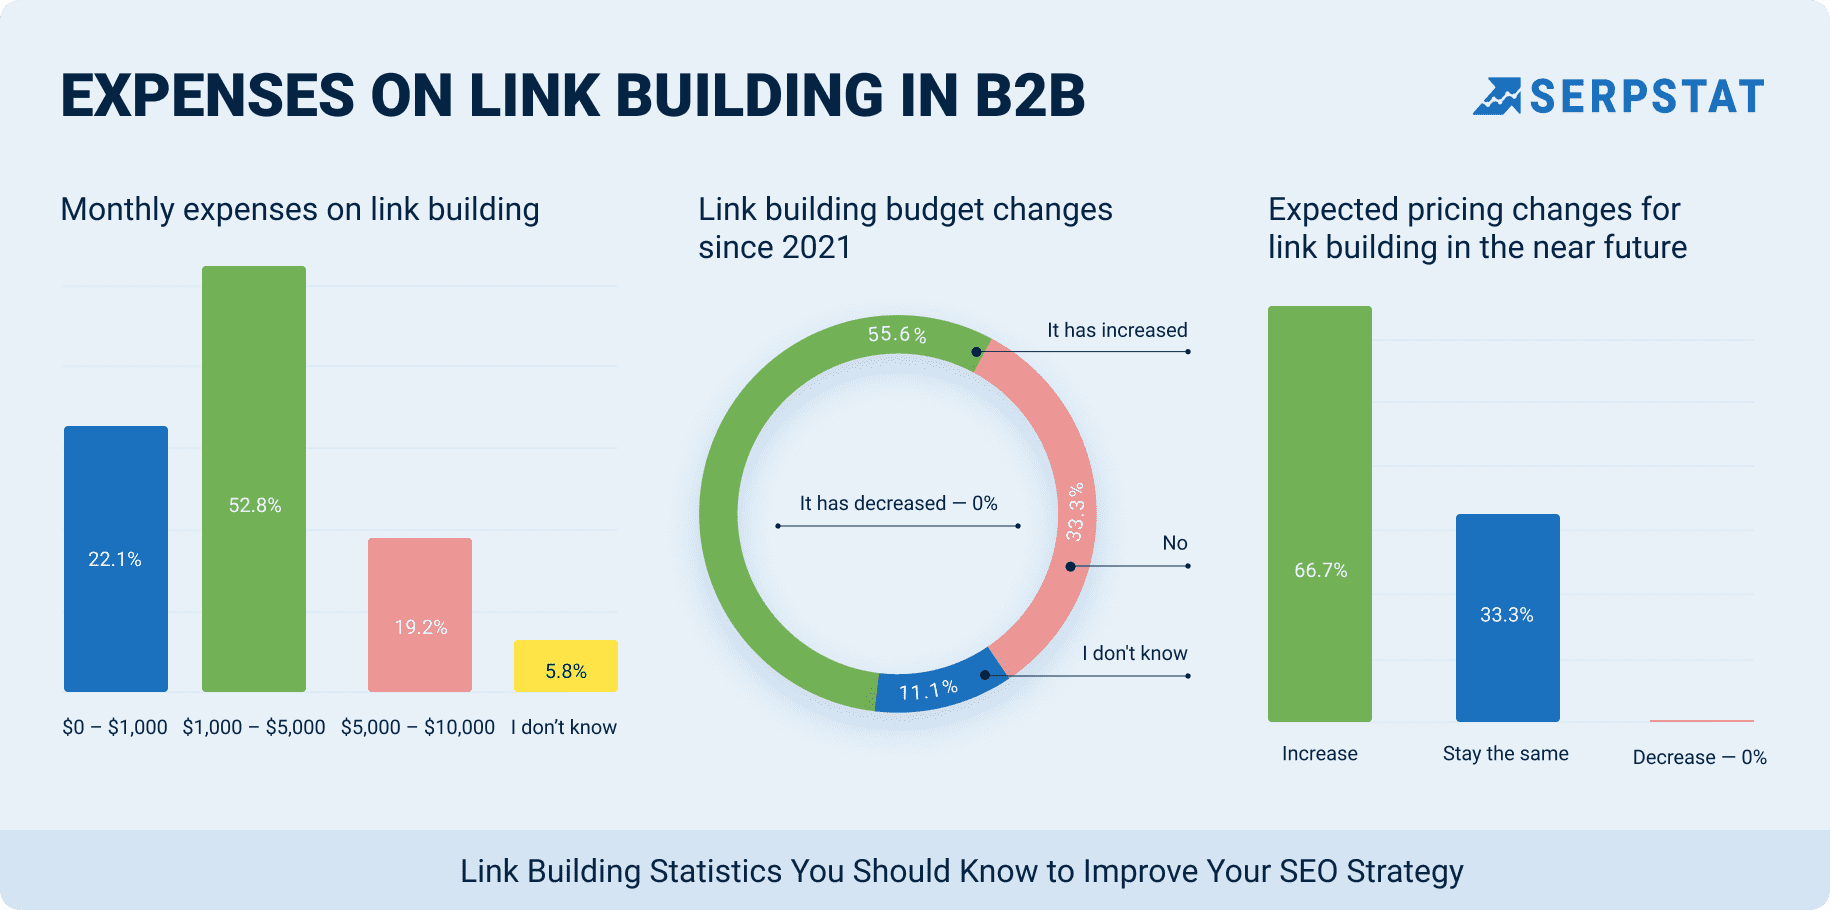 Expenses on link building in B2B